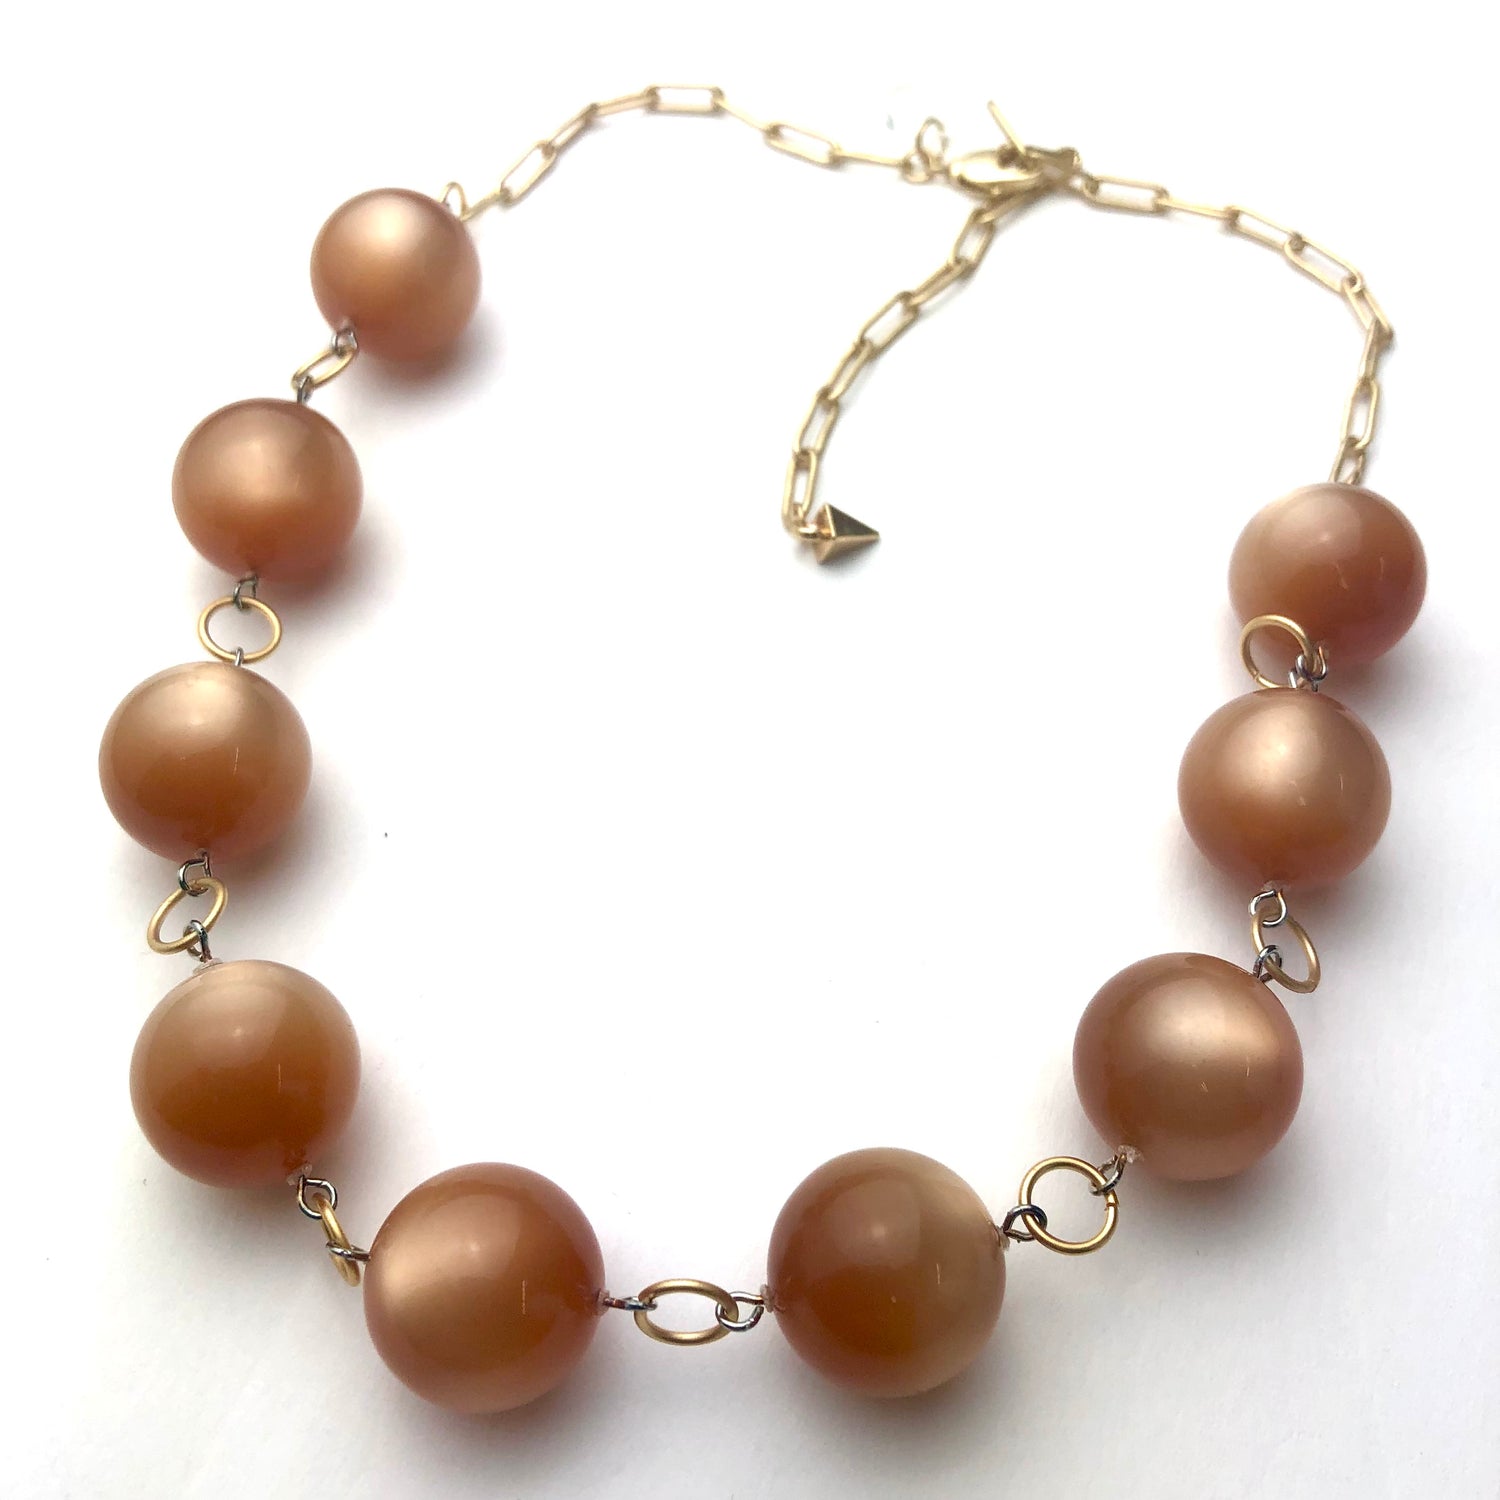 moonglow bauble necklace